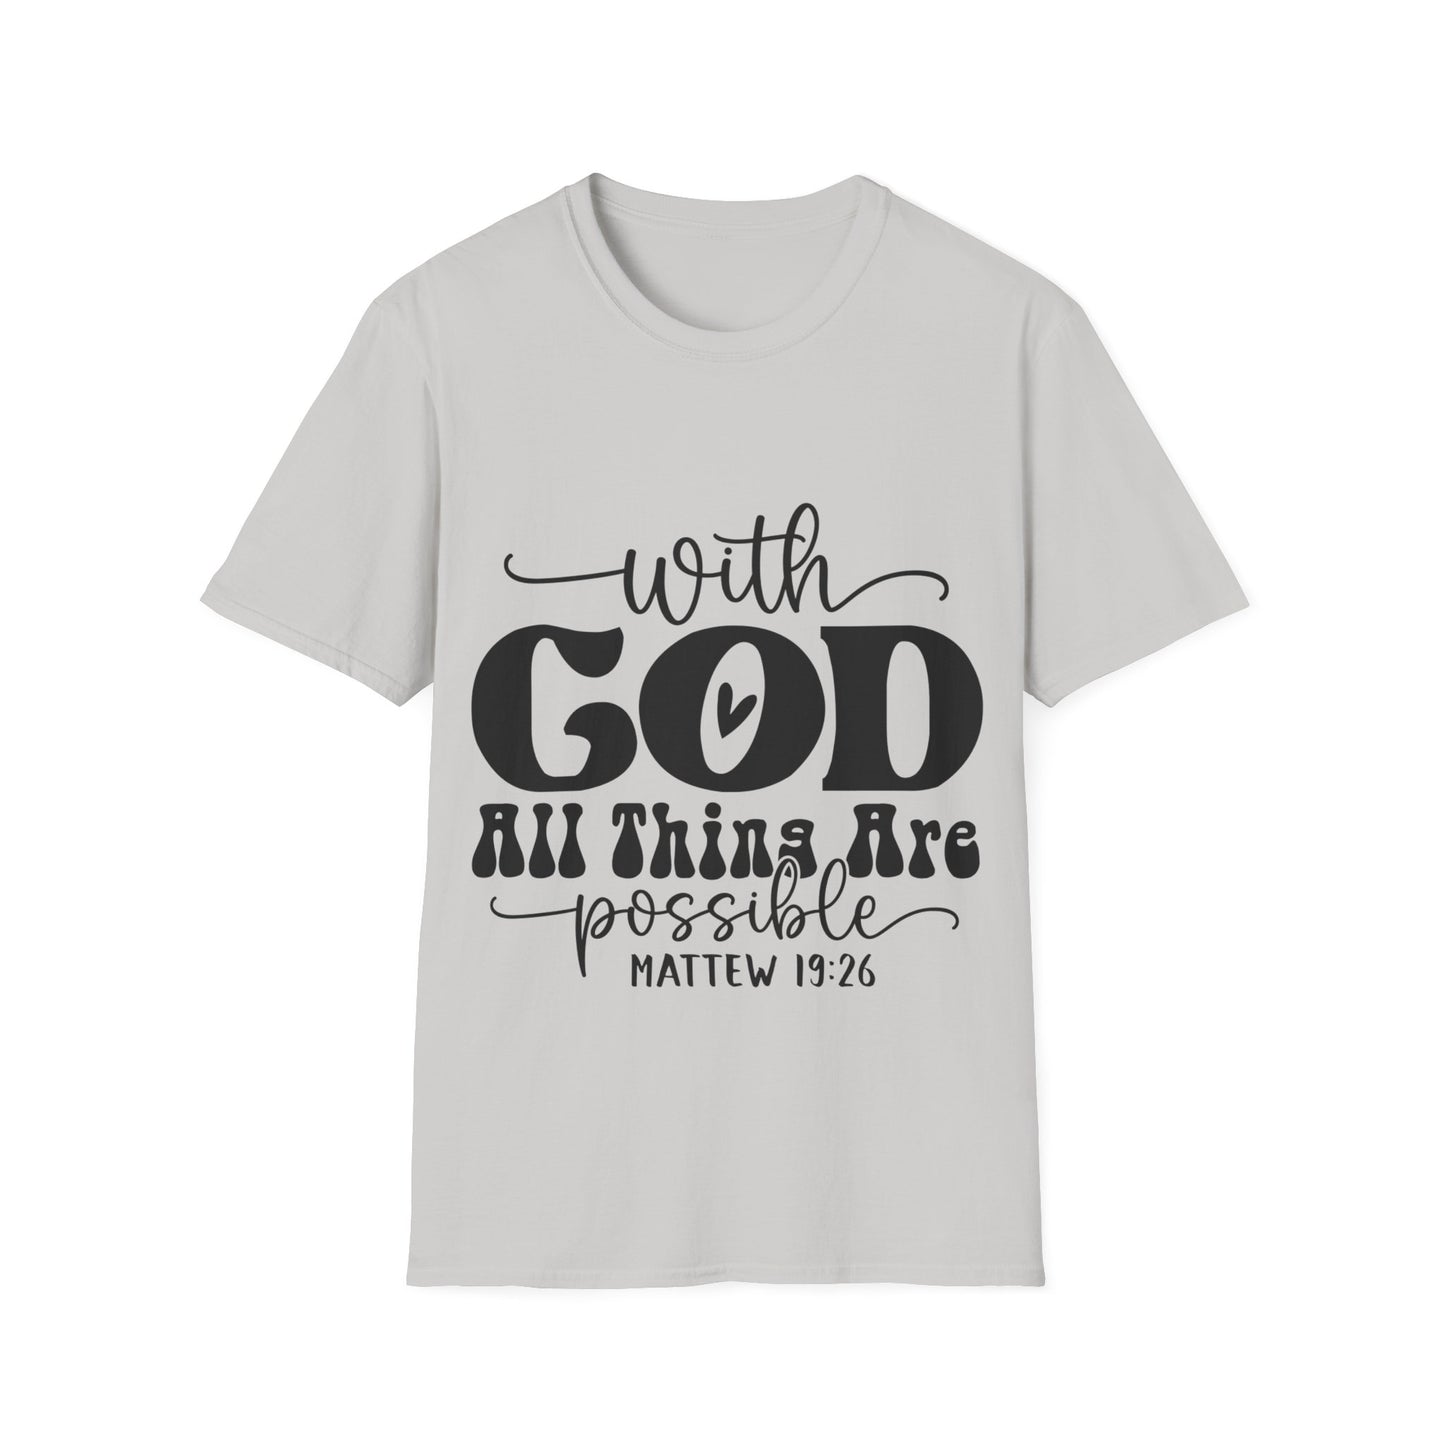 With God All Thing Are Possible Matter 19:26 (2) Triple Viking T-Shirt